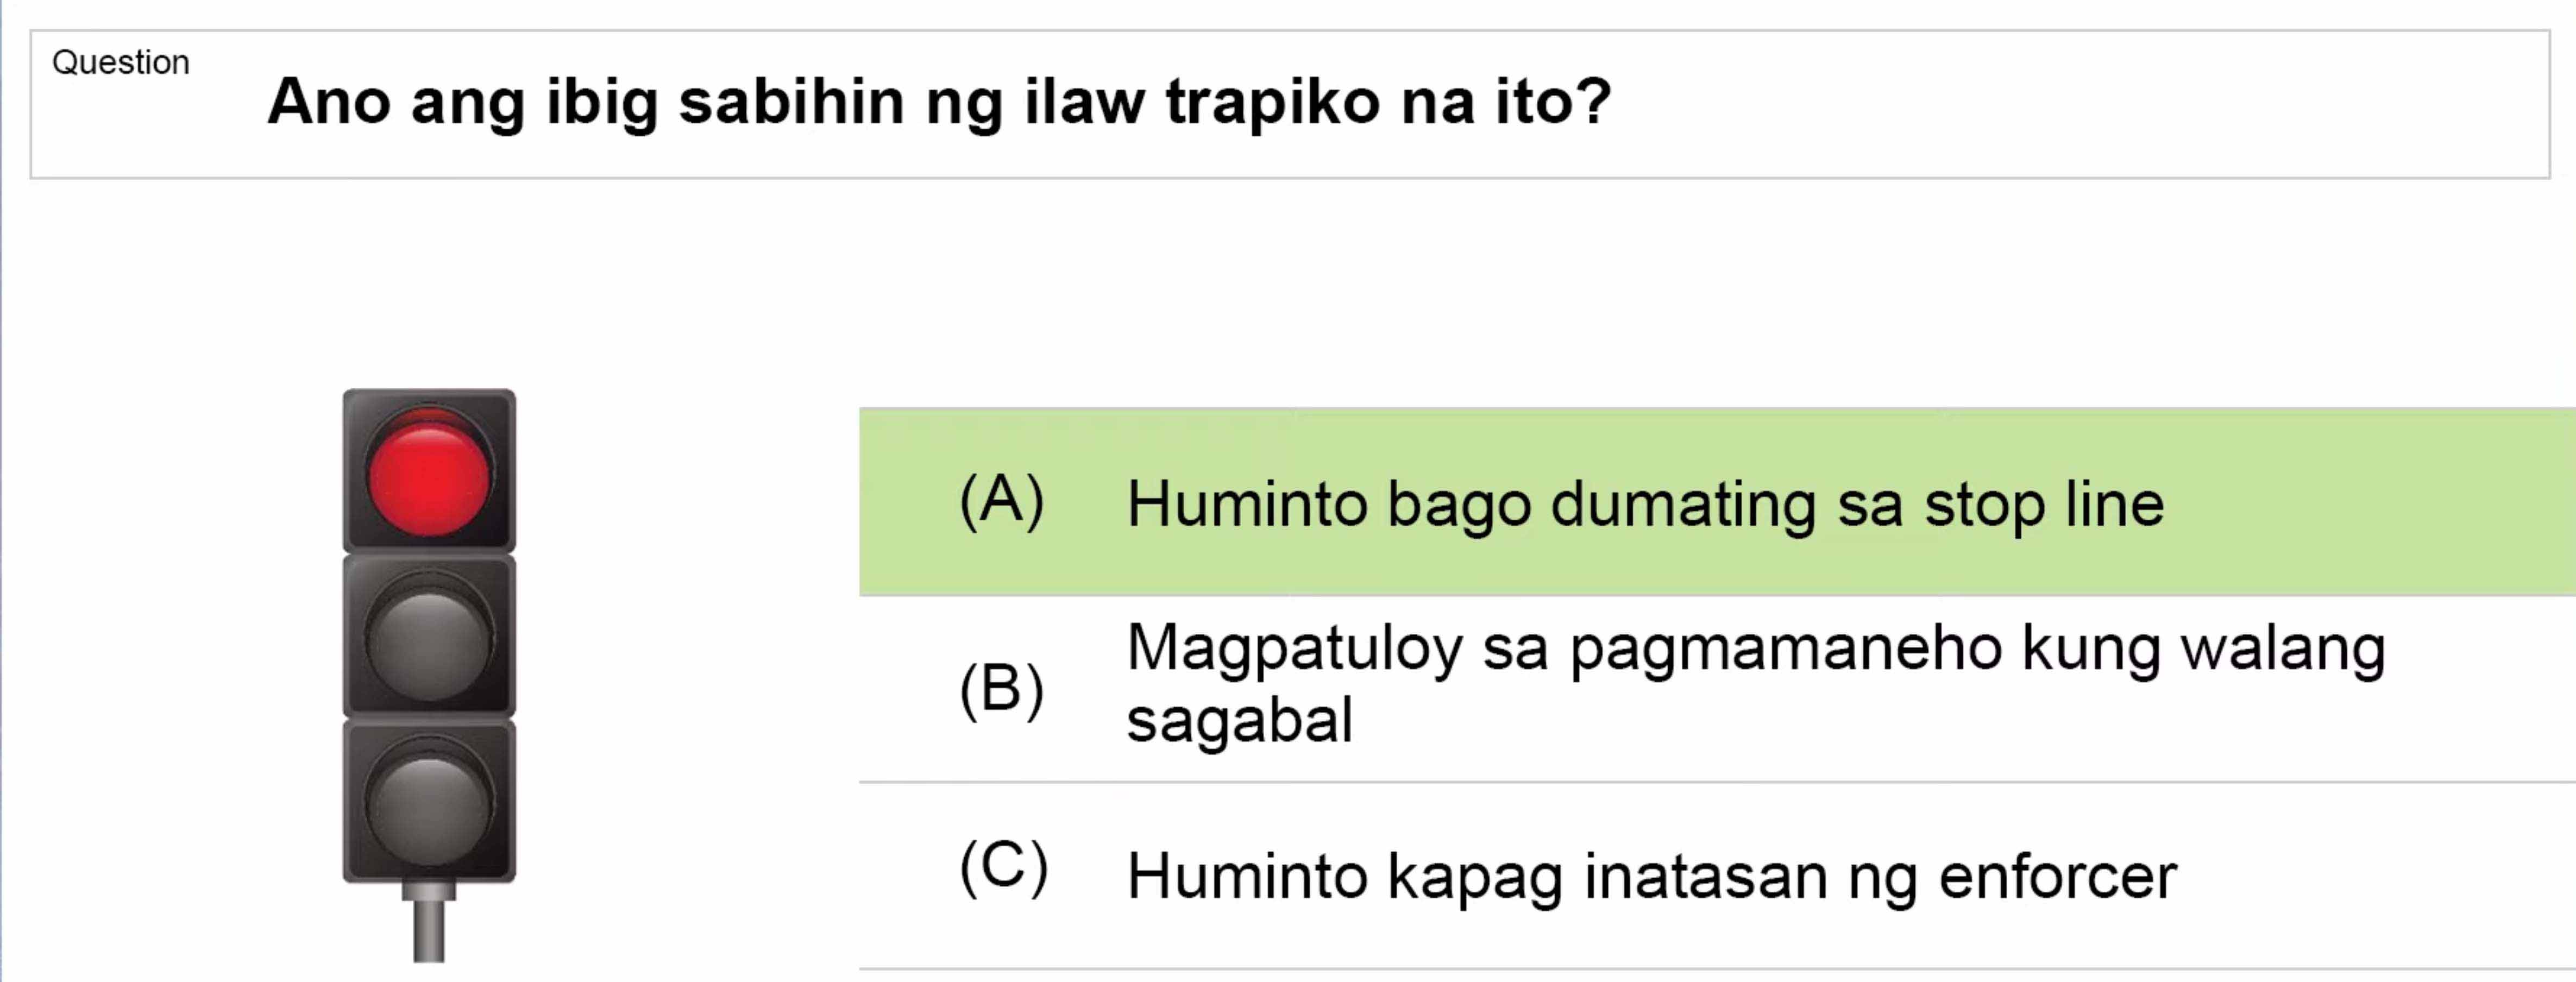 LTO Tagalog non professional exam reviewer motorcycle 3 (29)